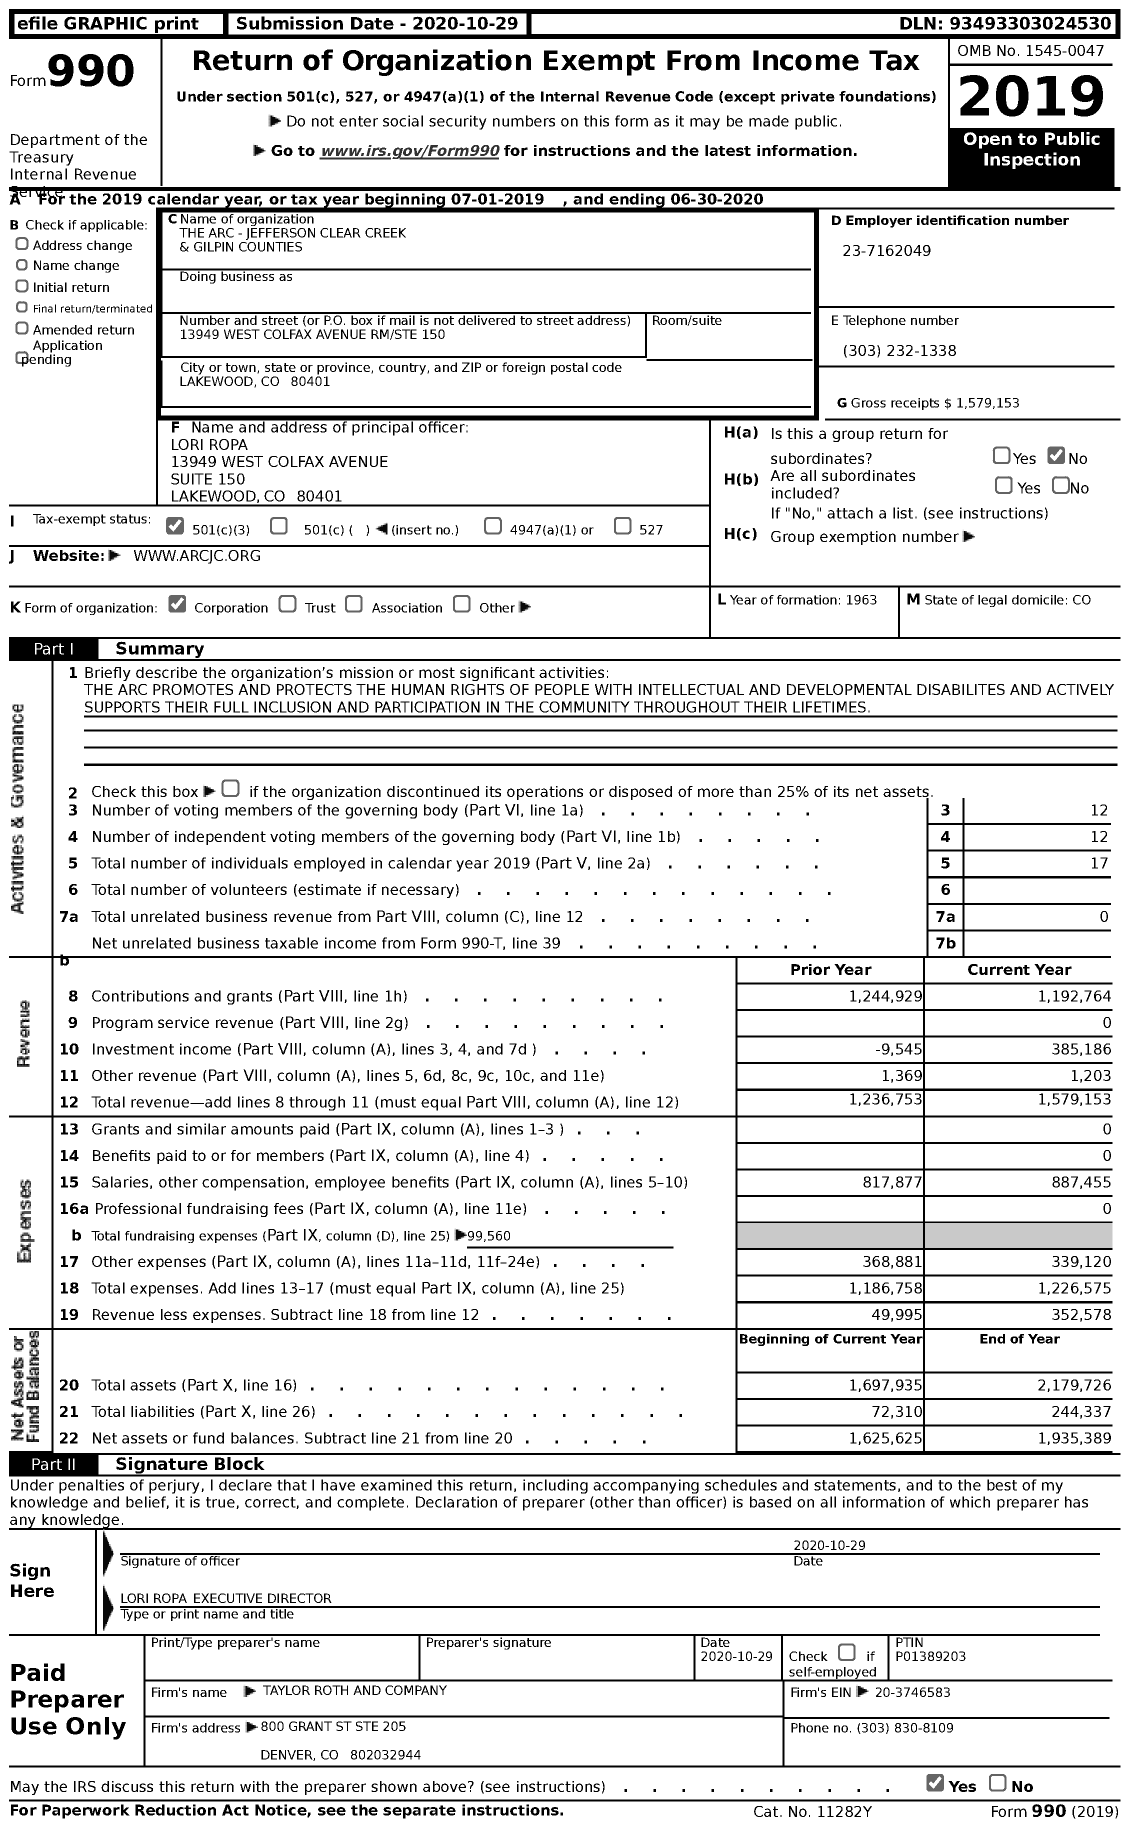 Image of first page of 2019 Form 990 for The Arc-Jefferson Clear Creek & Gilpin Counties